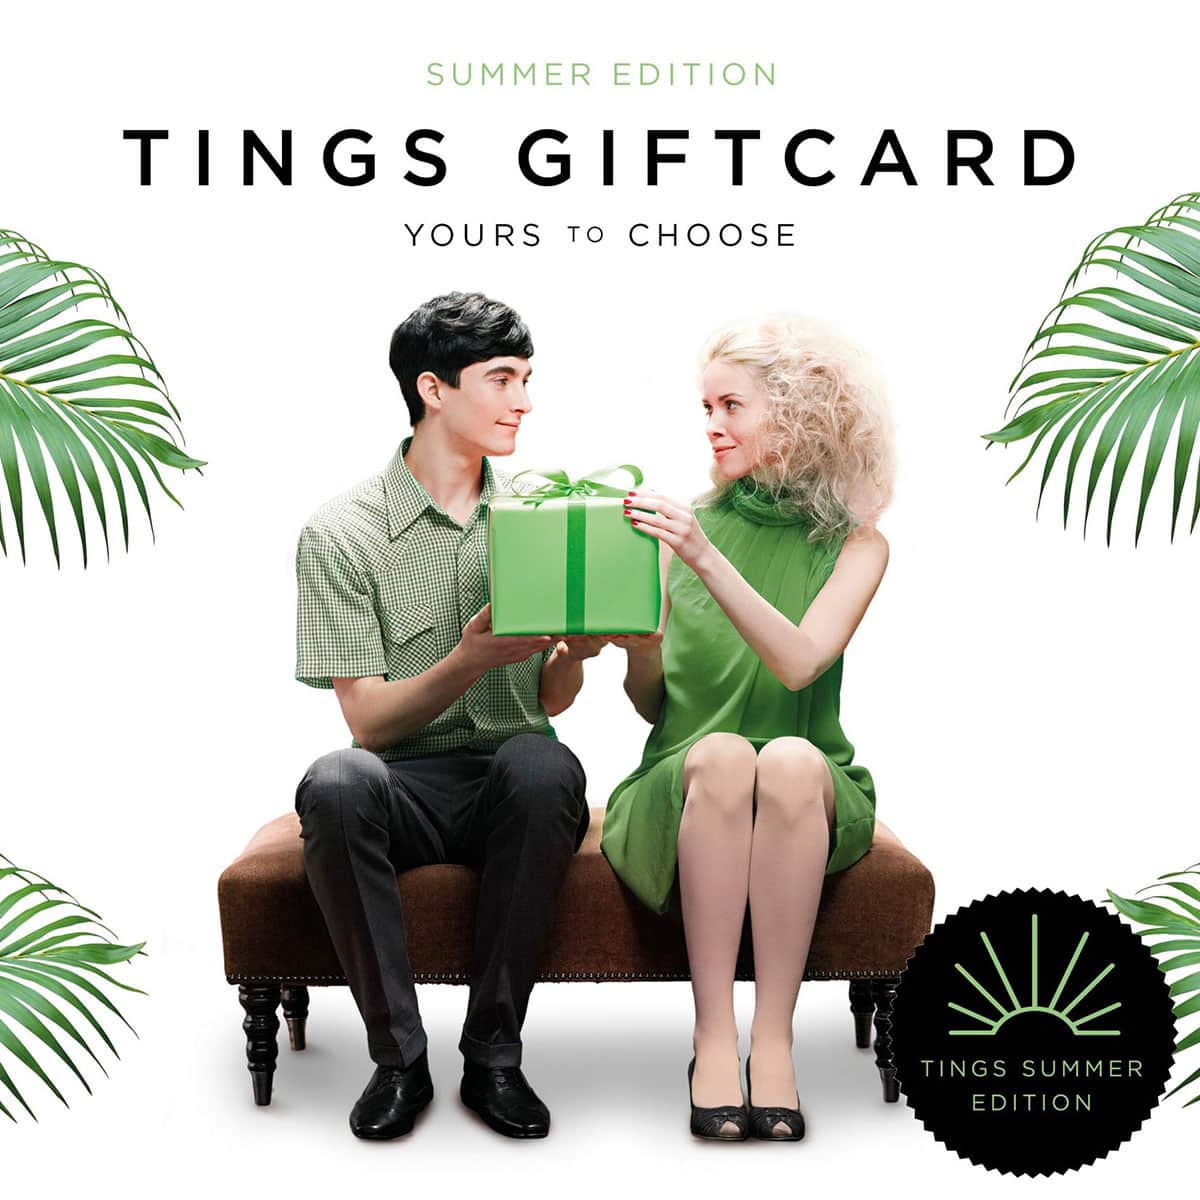 Tings-giftcard-summer-edition-2023